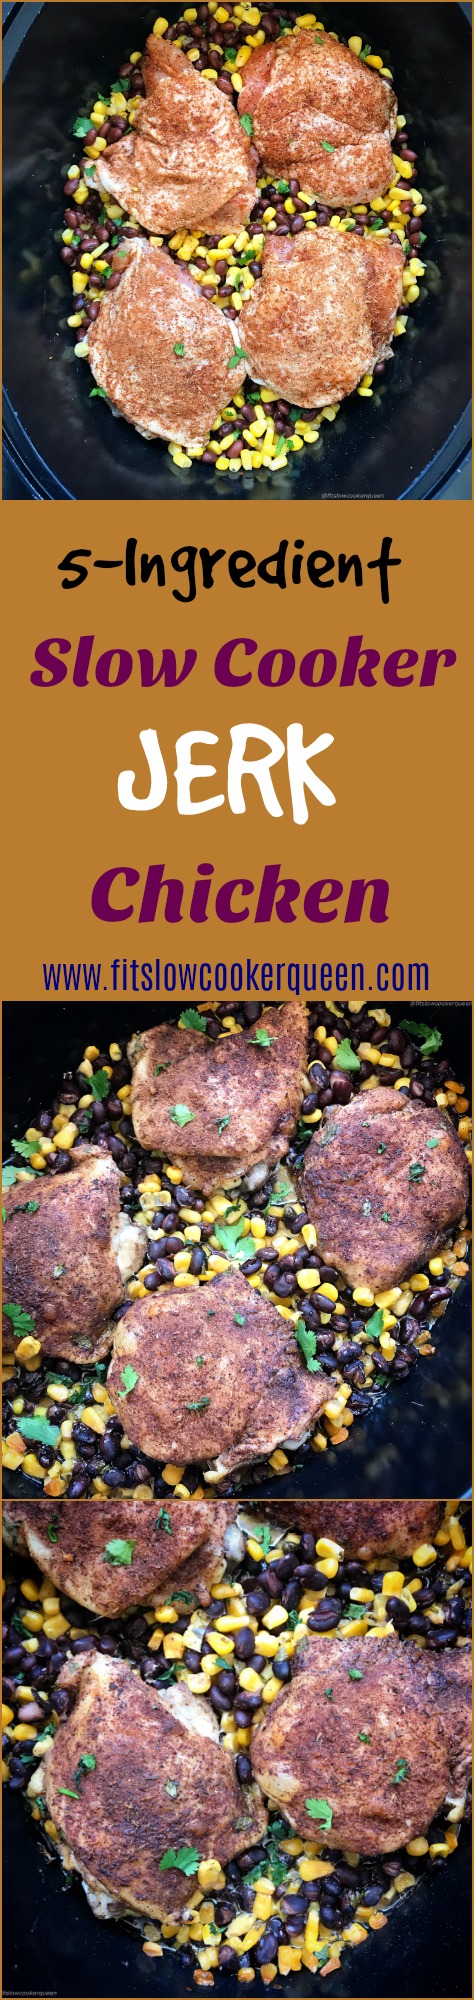 Jerk chicken, quick and in the slow cooker! Grab your favorite jerk seasoning (or use the one provided here) for this easy slow cooker recipe. With only 5 ingredients, you can pretty much use any cut of chicken and serve the finished product so many different ways.